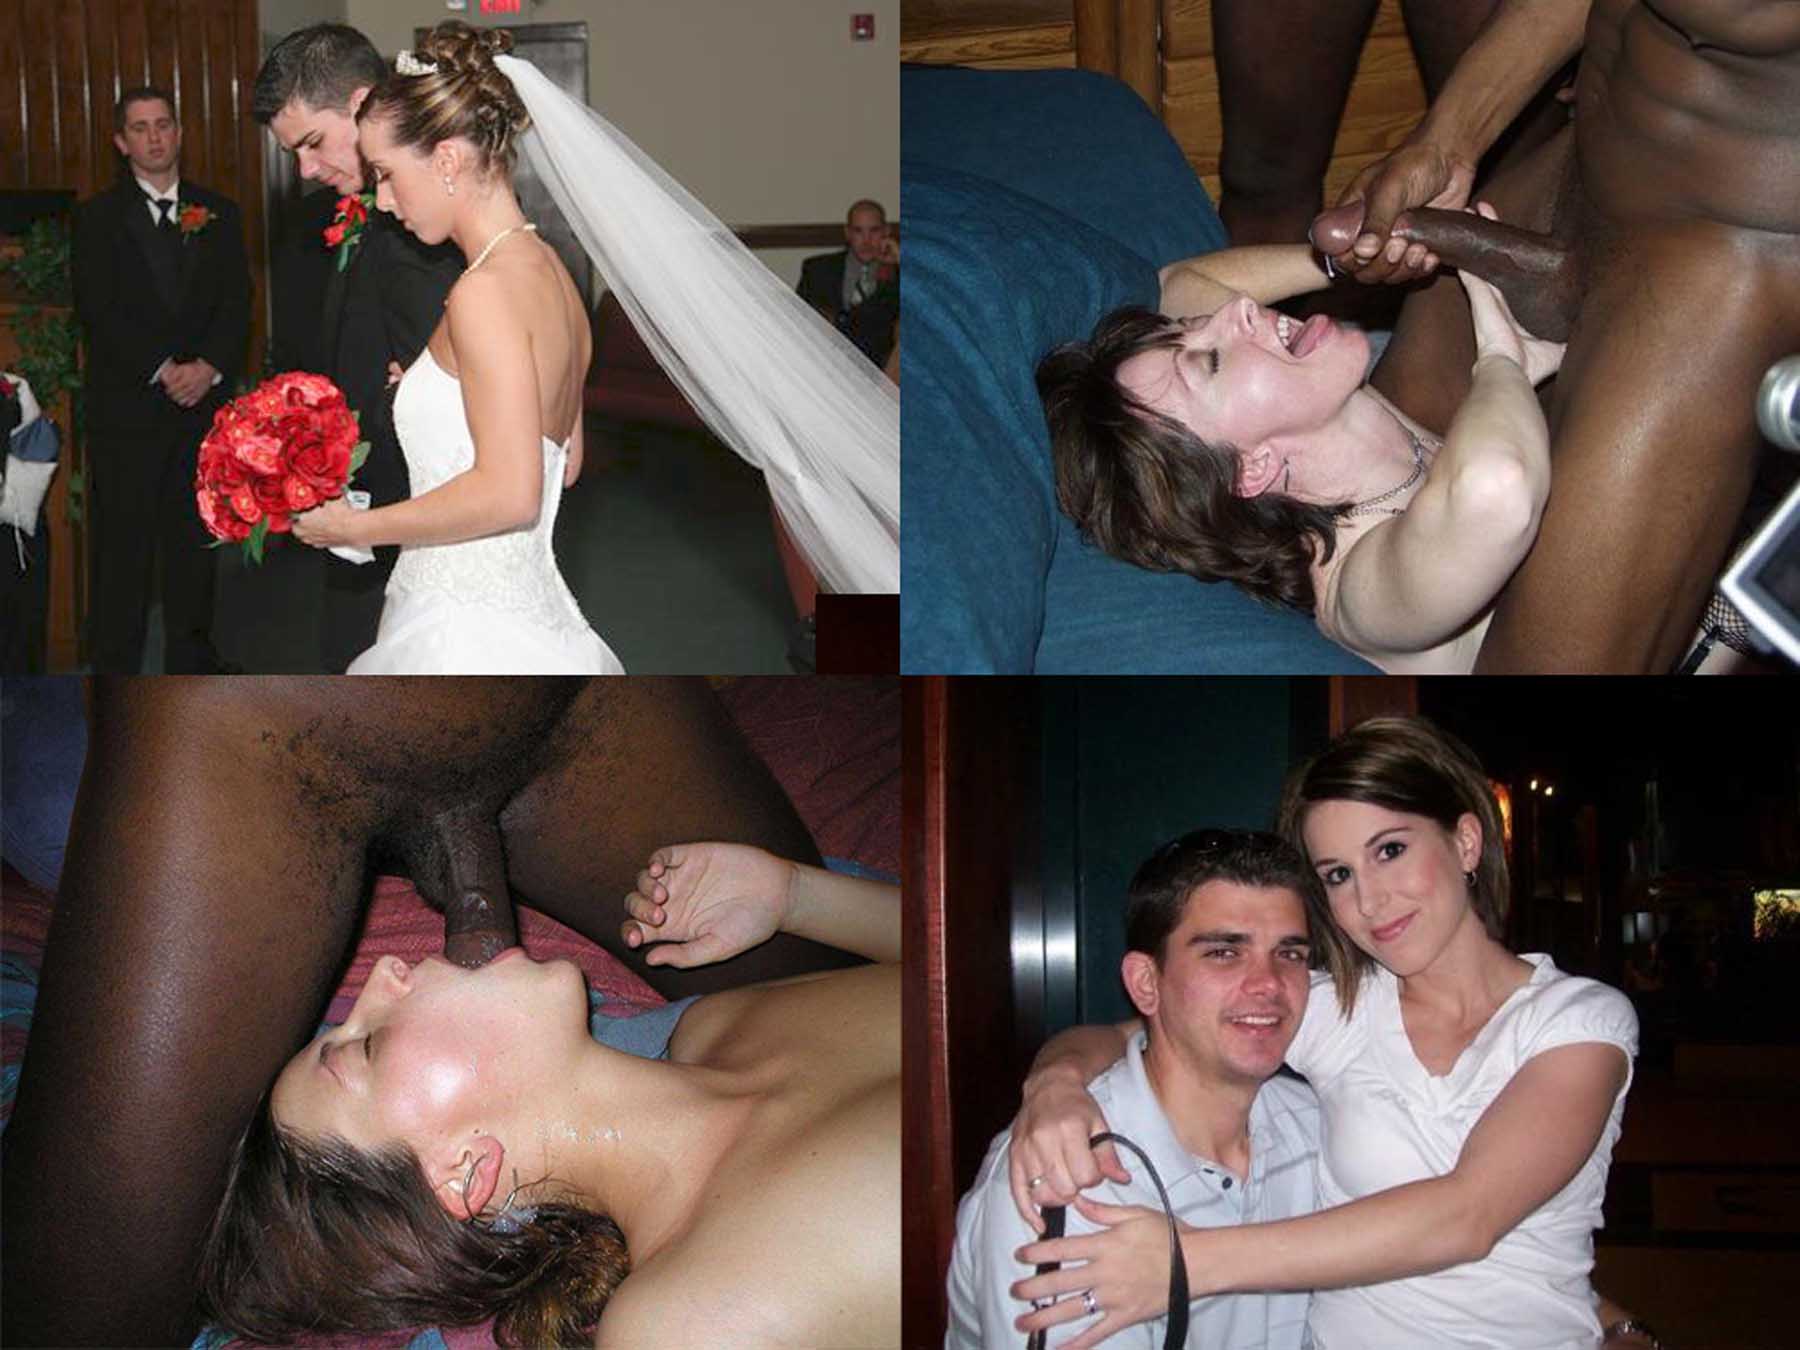 Real Couples After Sex - Wedding before and after porn. wedding before and ...